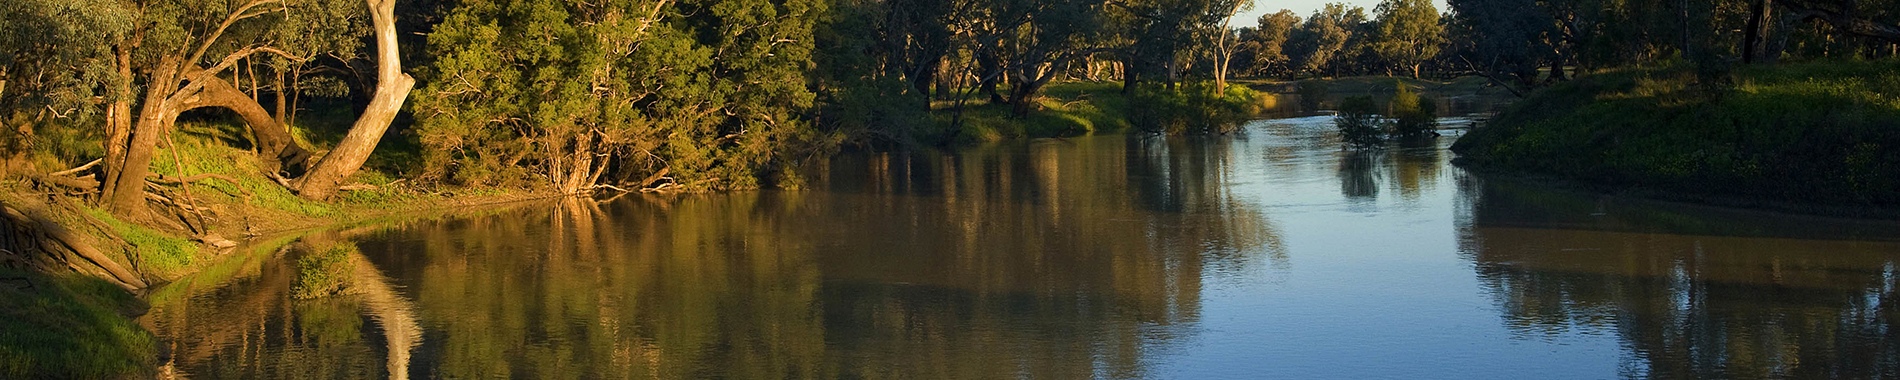 The Darling River at sunset, NSW.